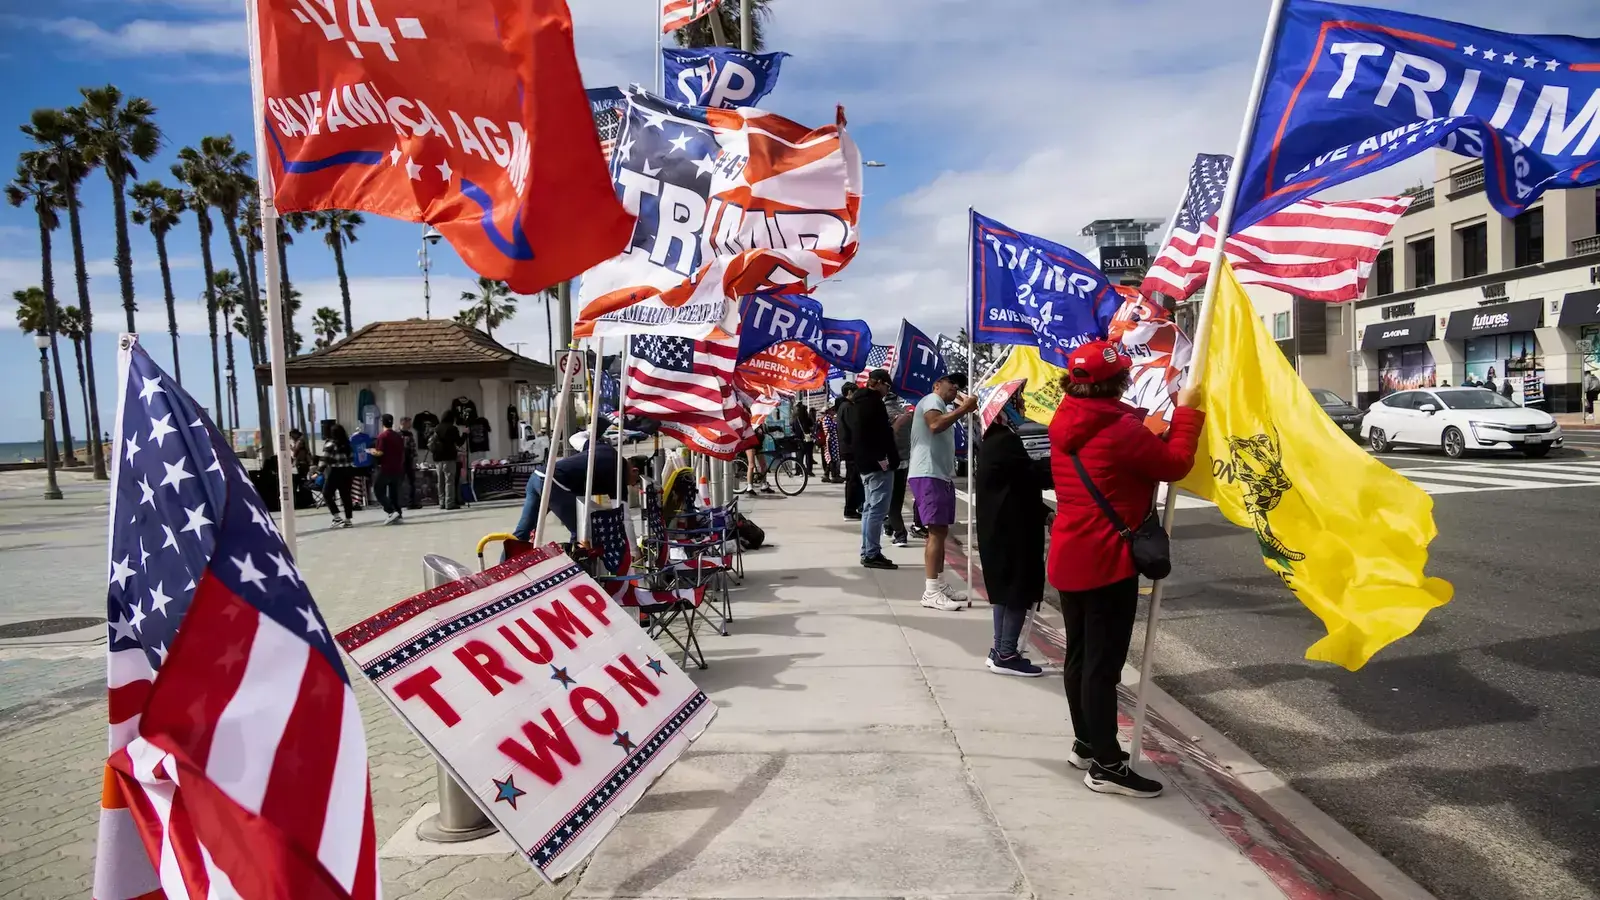 Supporters of Republican presidential candidate and former U.S. President Donald Trump gather, ahead of Super Tuesday, in Huntington Beach, California, U.S.